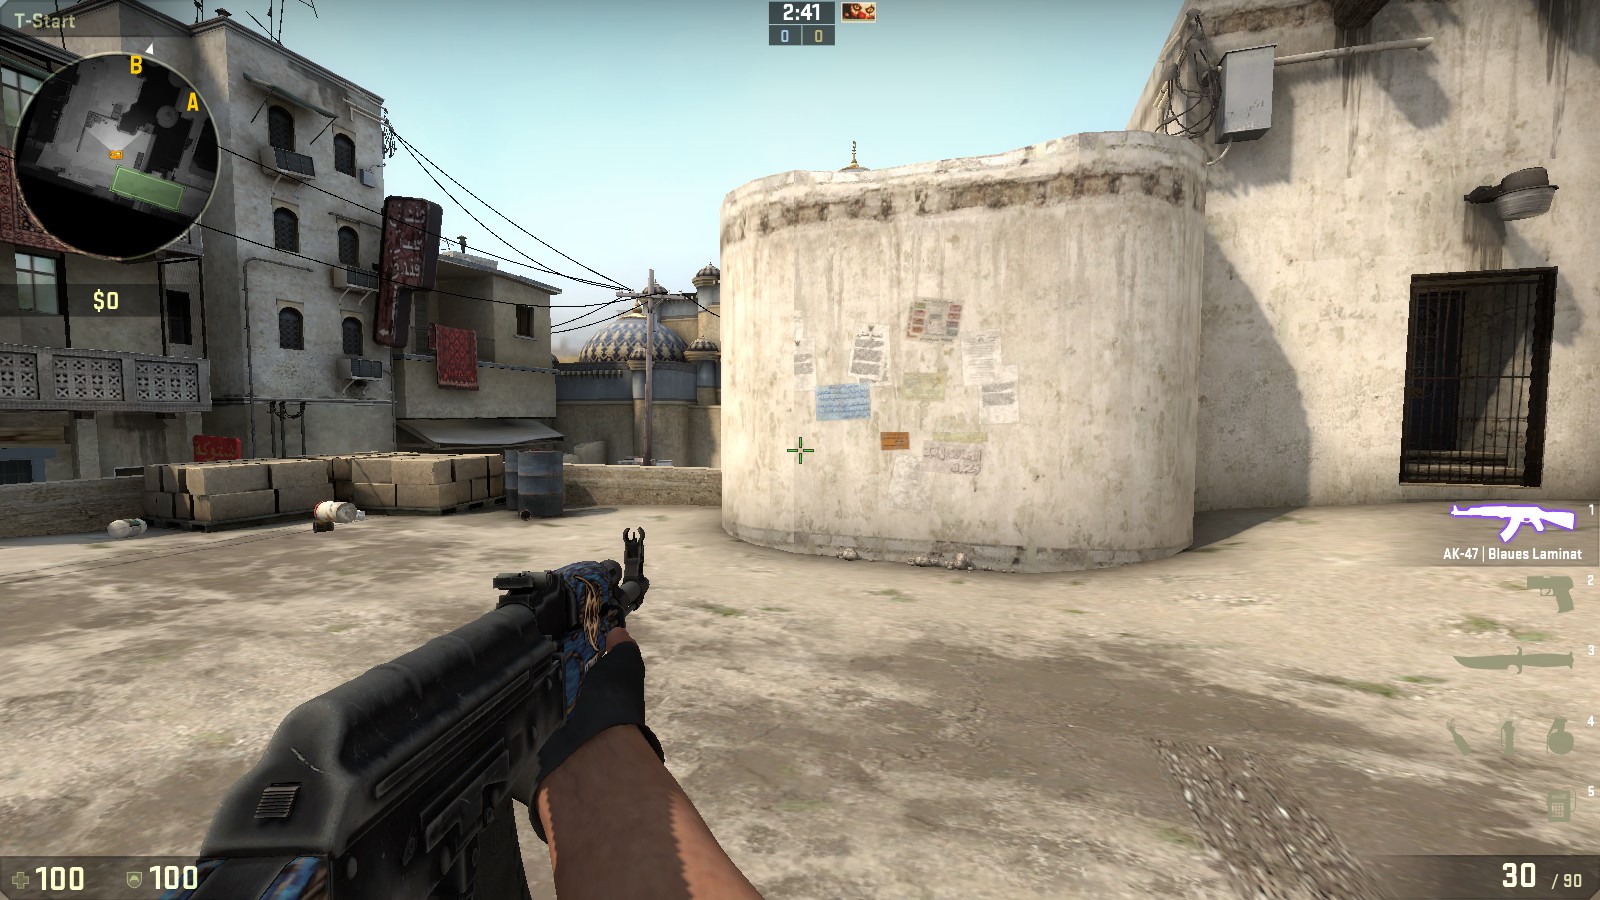 Switch to the left hand in CS:GO